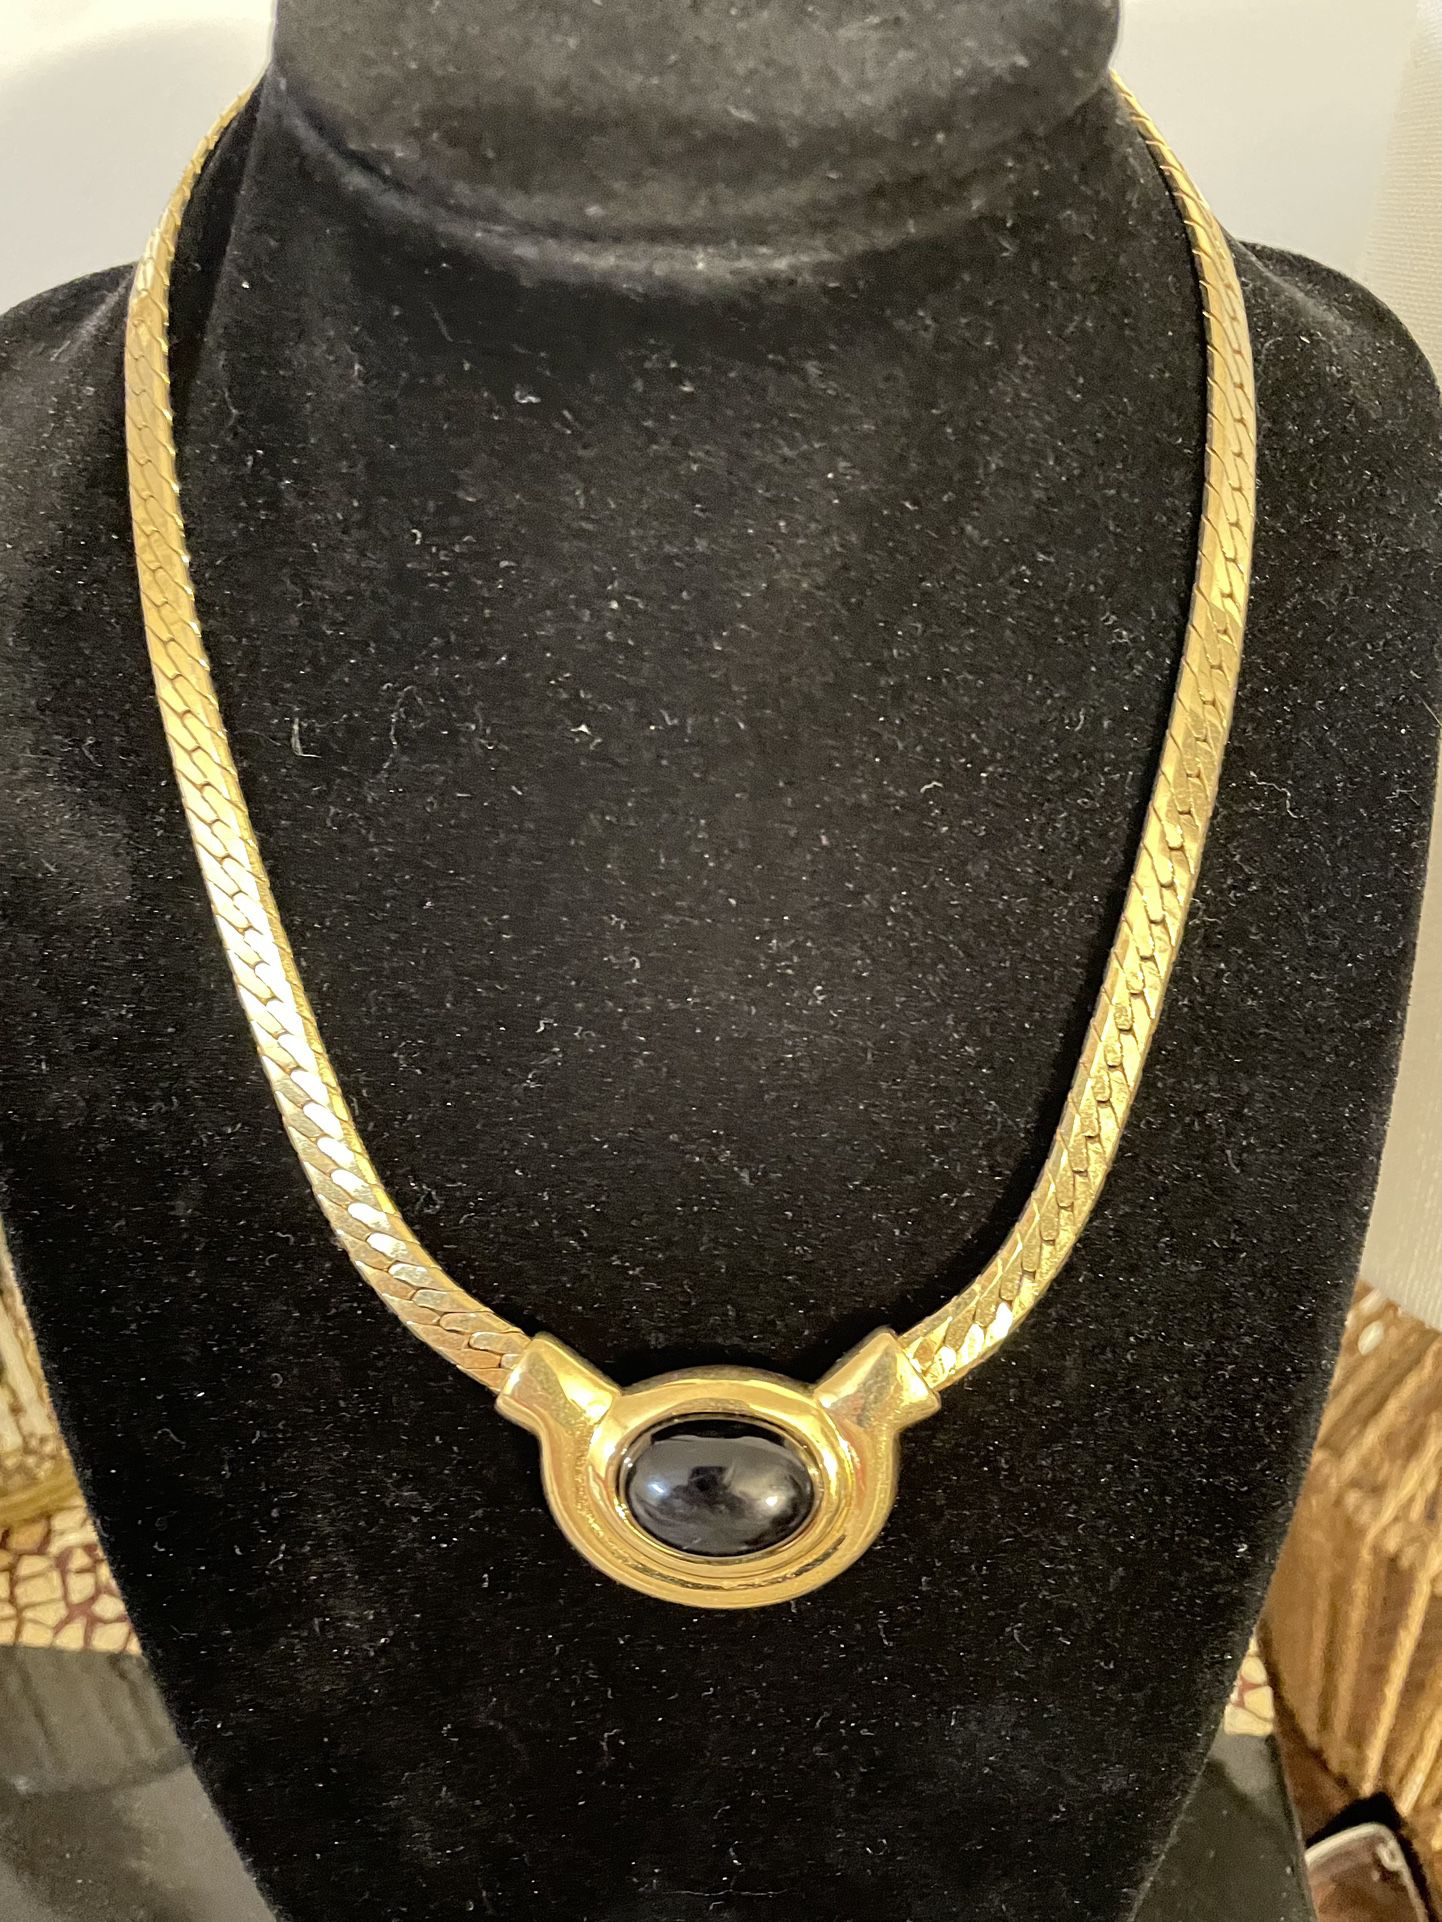 “Napier” Brand Vintage Gold Plated Necklace